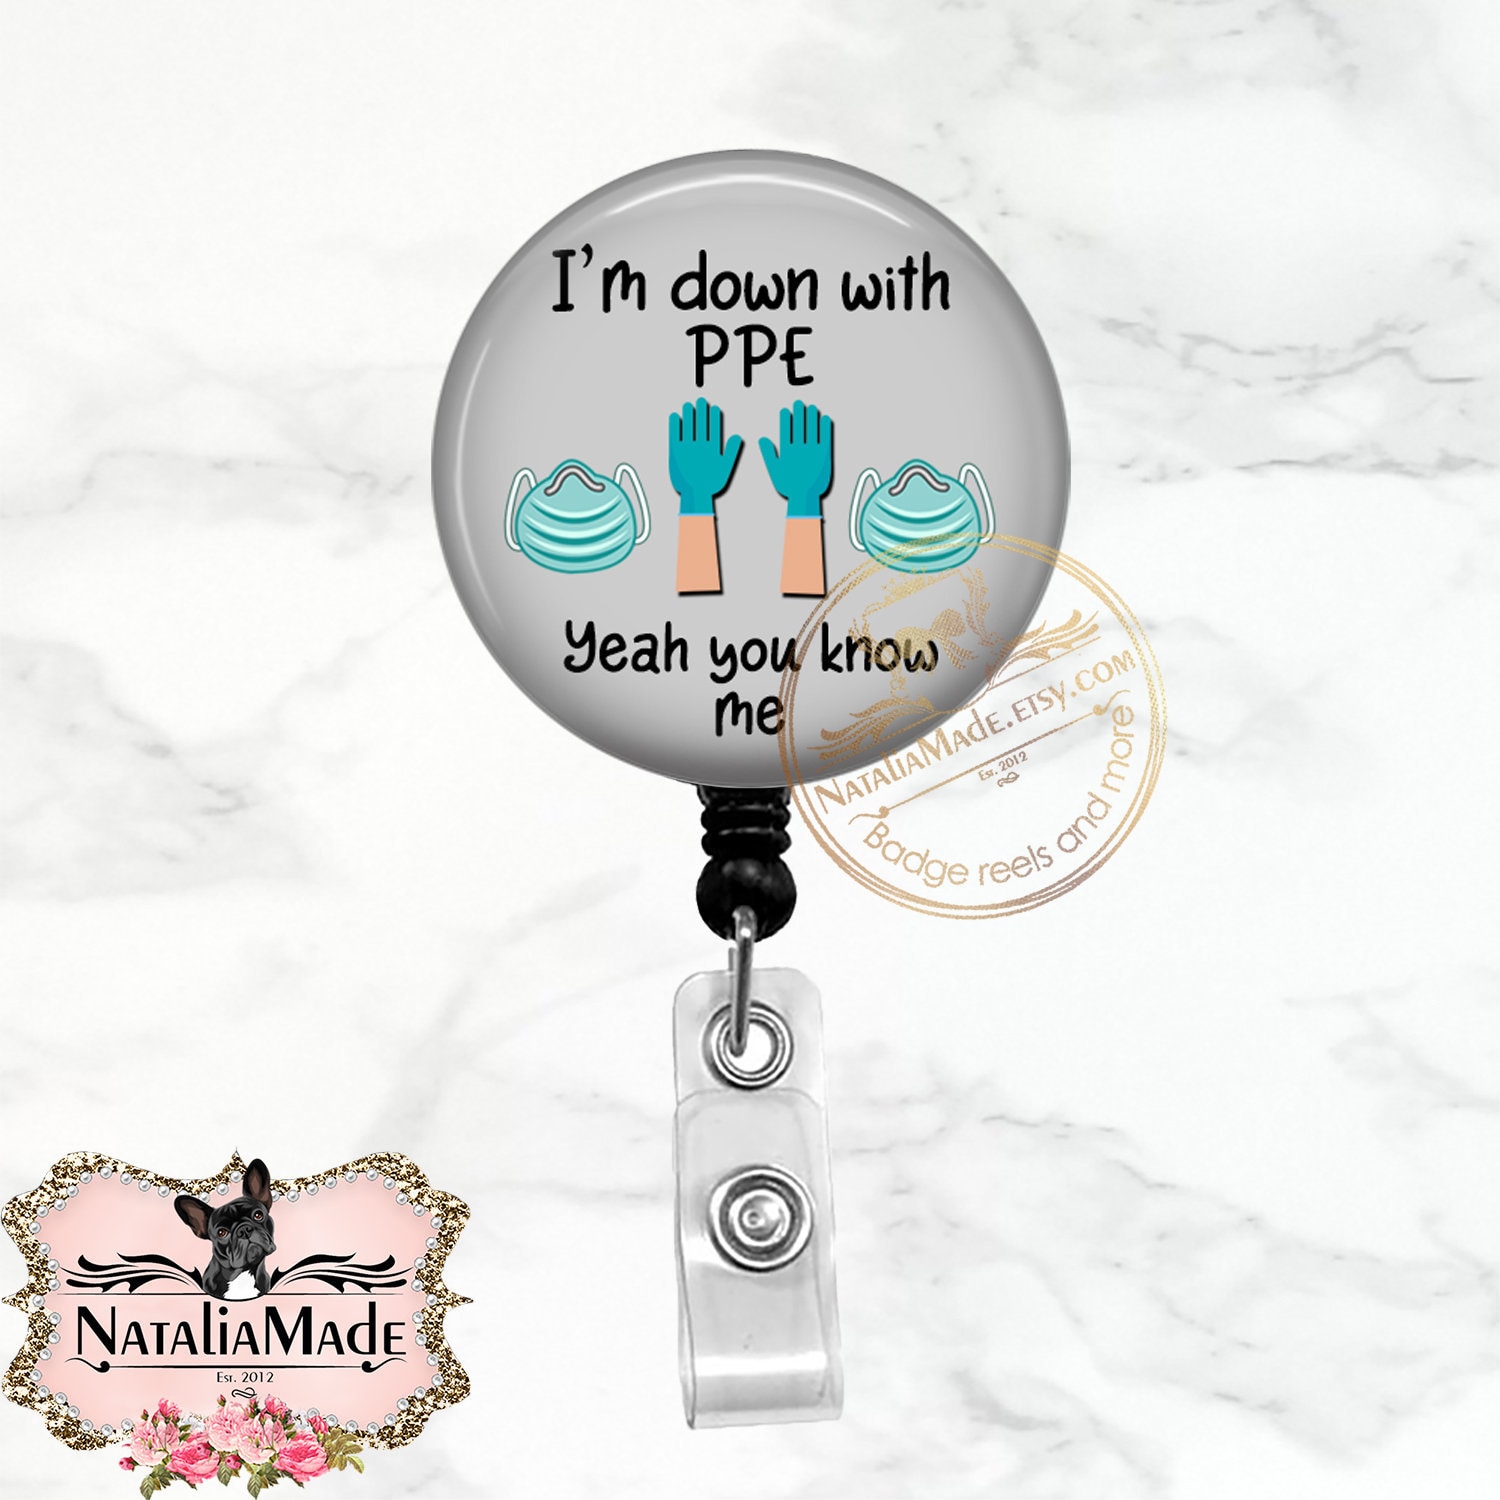  Badge Holder - Lanyards for ID Badges with Retractable Badge  Reel Clip - Durable and Stylish ID Card Protector Funny Keychain for Nurse  Doctor Teacher Student Office School and Events